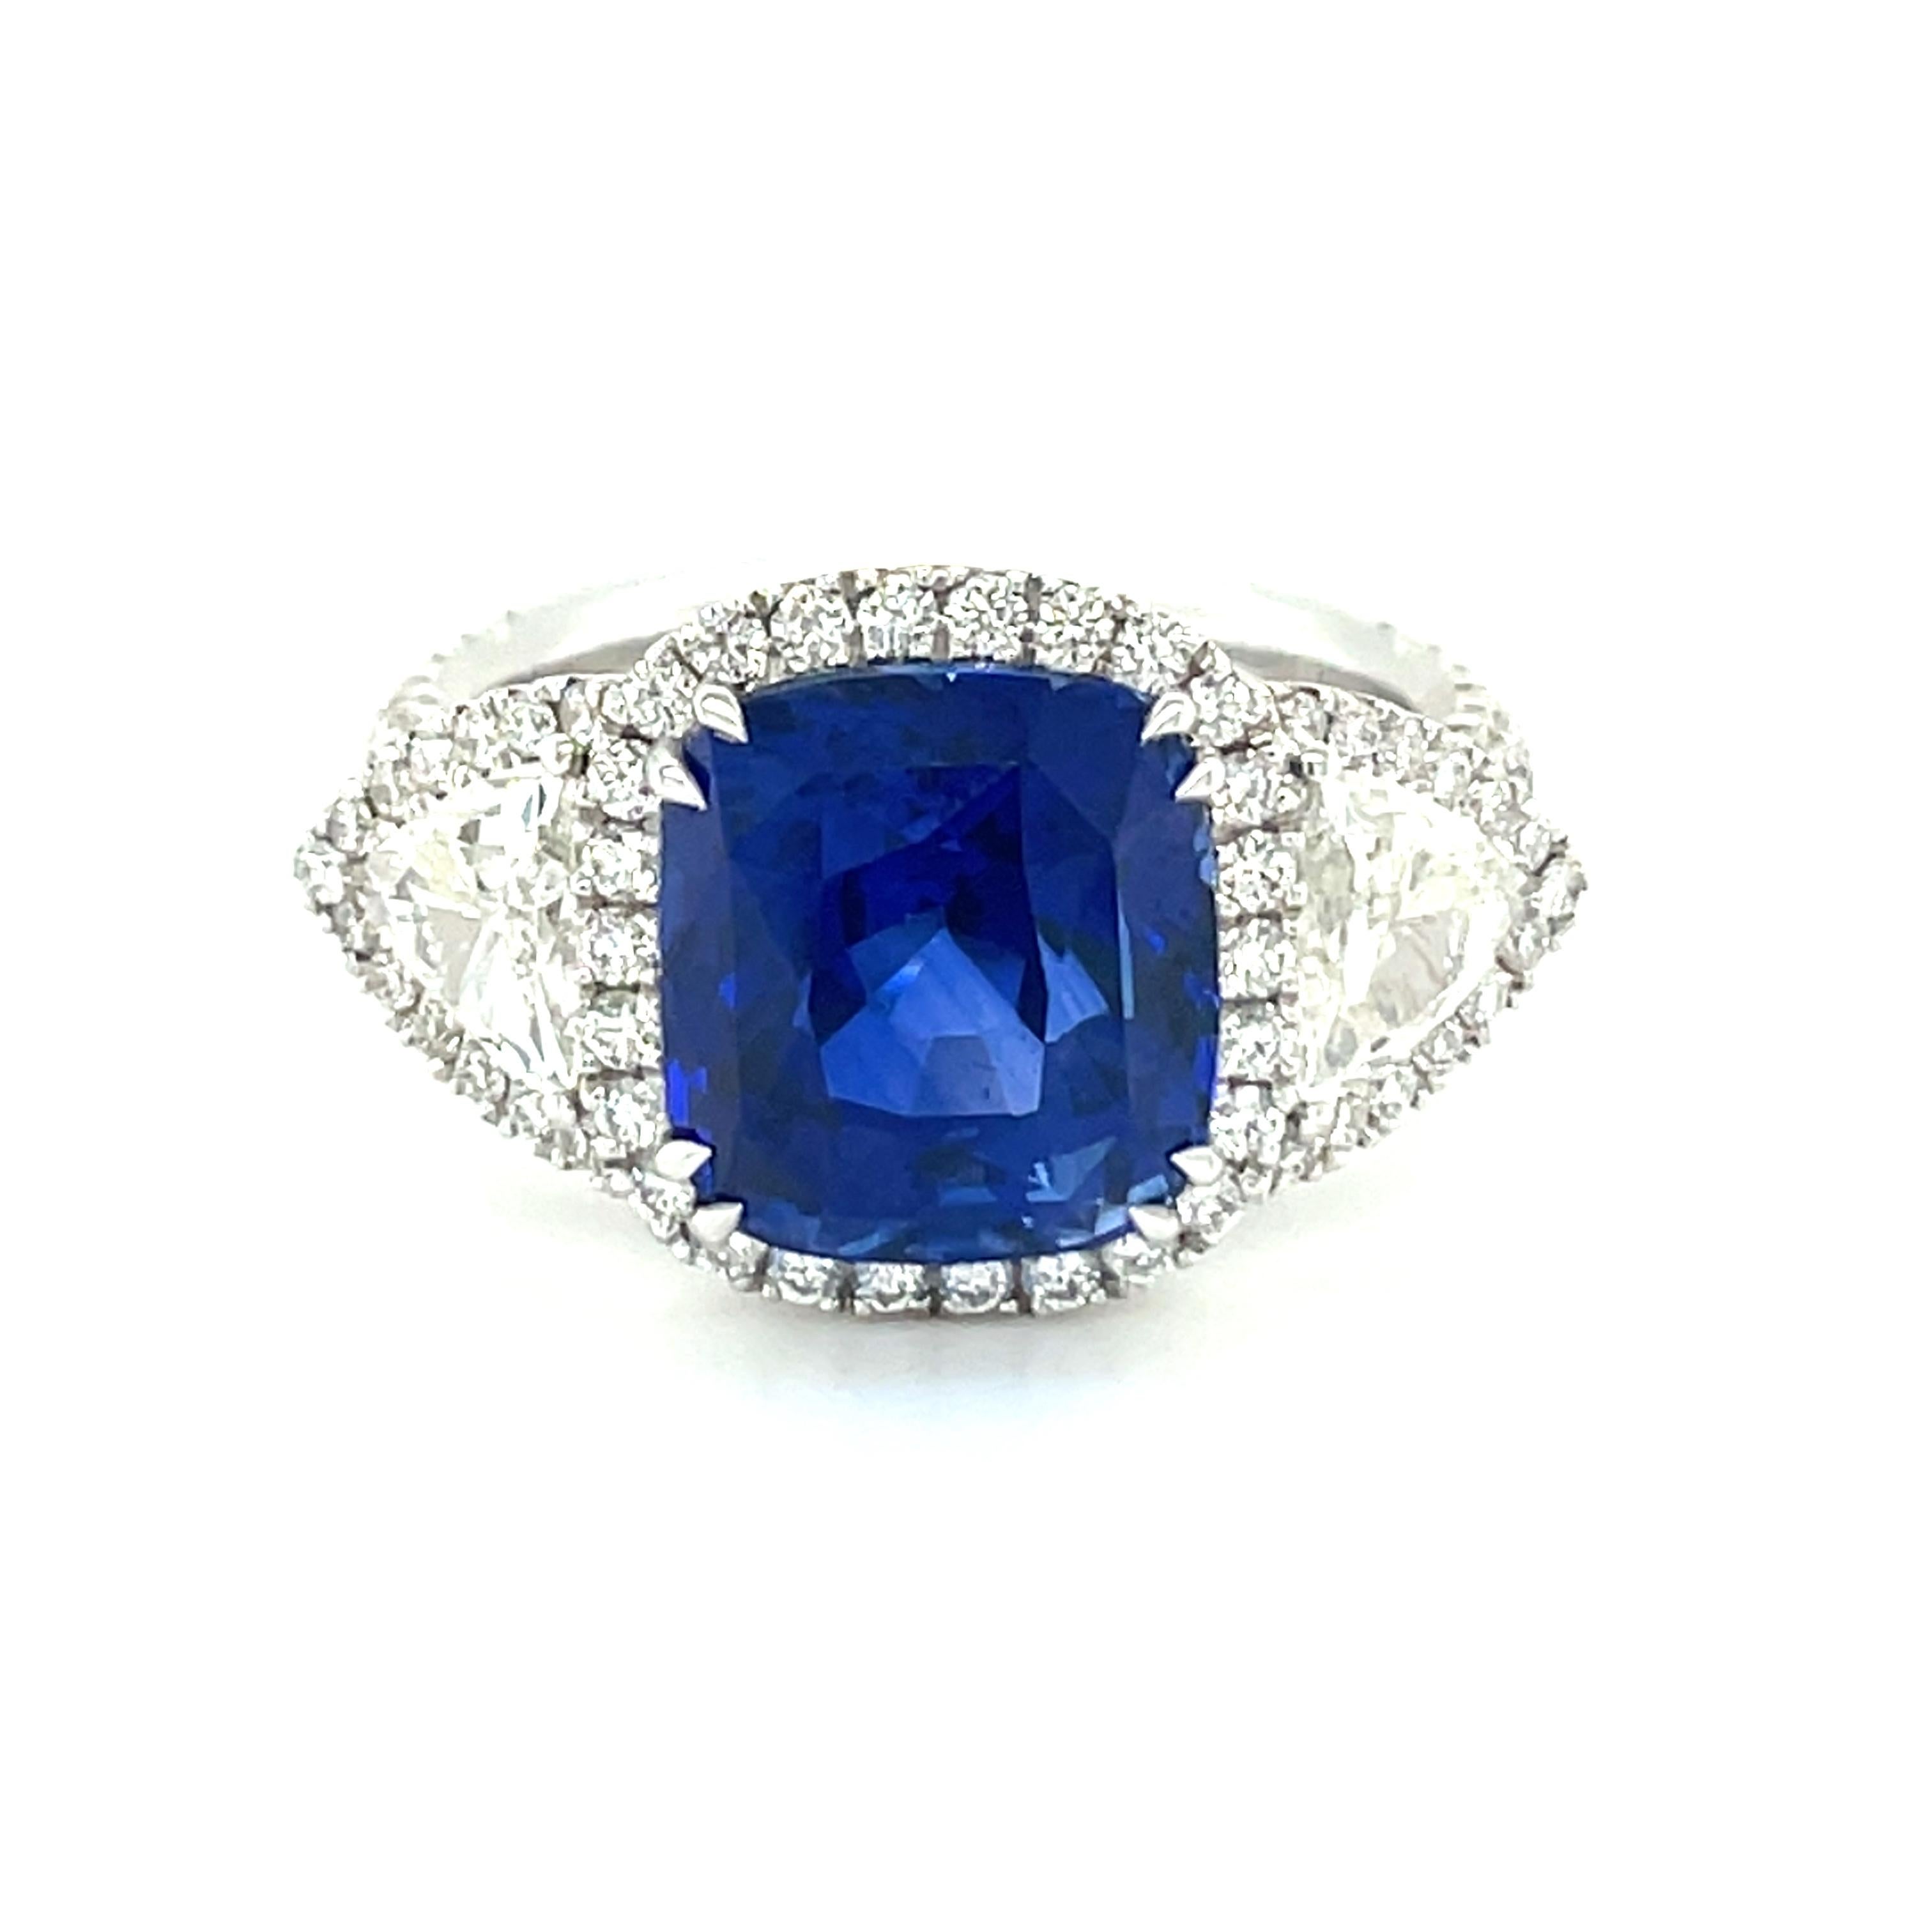 18K white gold diamond ring is from our Timeless Collection. This stunning piece of jewellery is made of a GRS certified cushion cut 8.5 Carat natural sapphire in vivid blue color. The origin of the sapphire is Sri Lanka. The sapphire is decorated